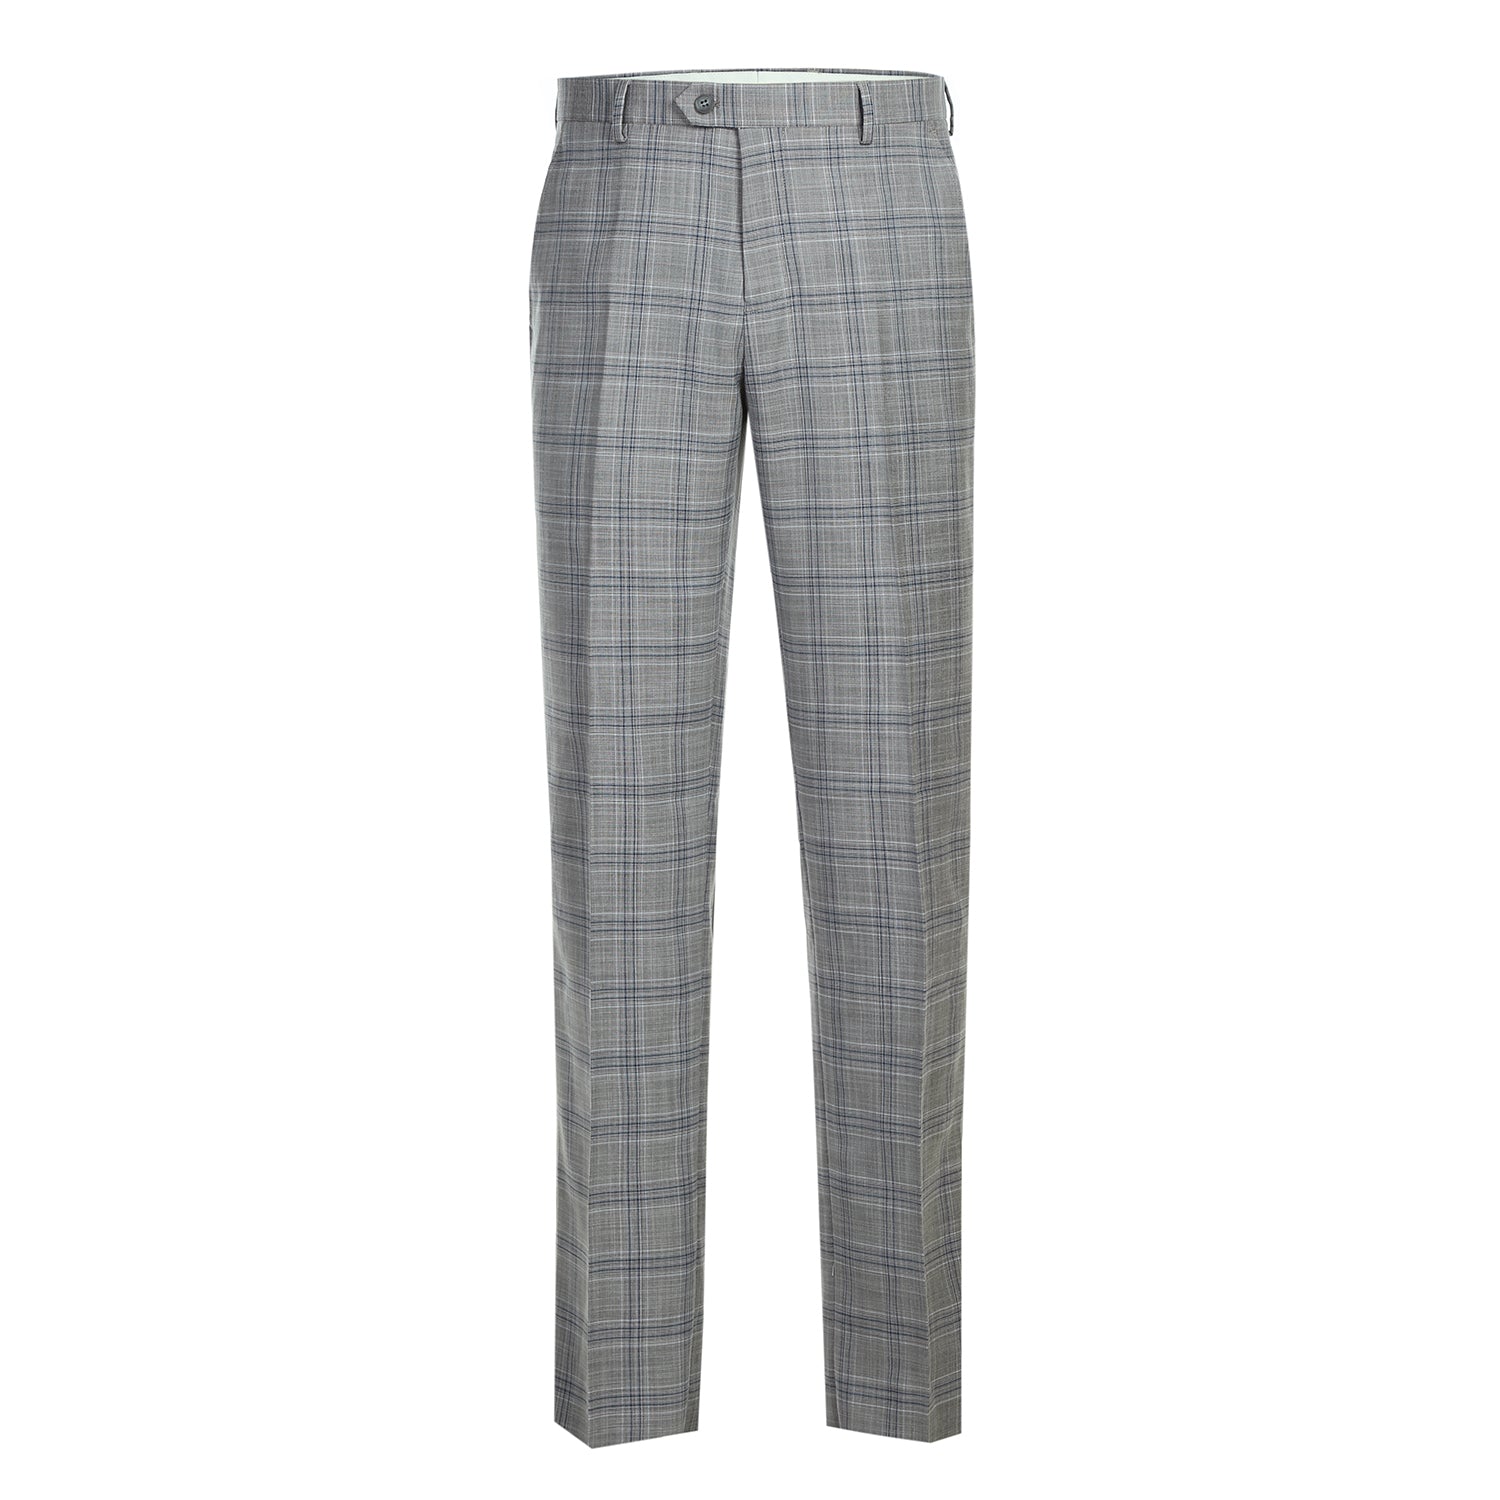 Men’s Classic Fit Checked Suits 9